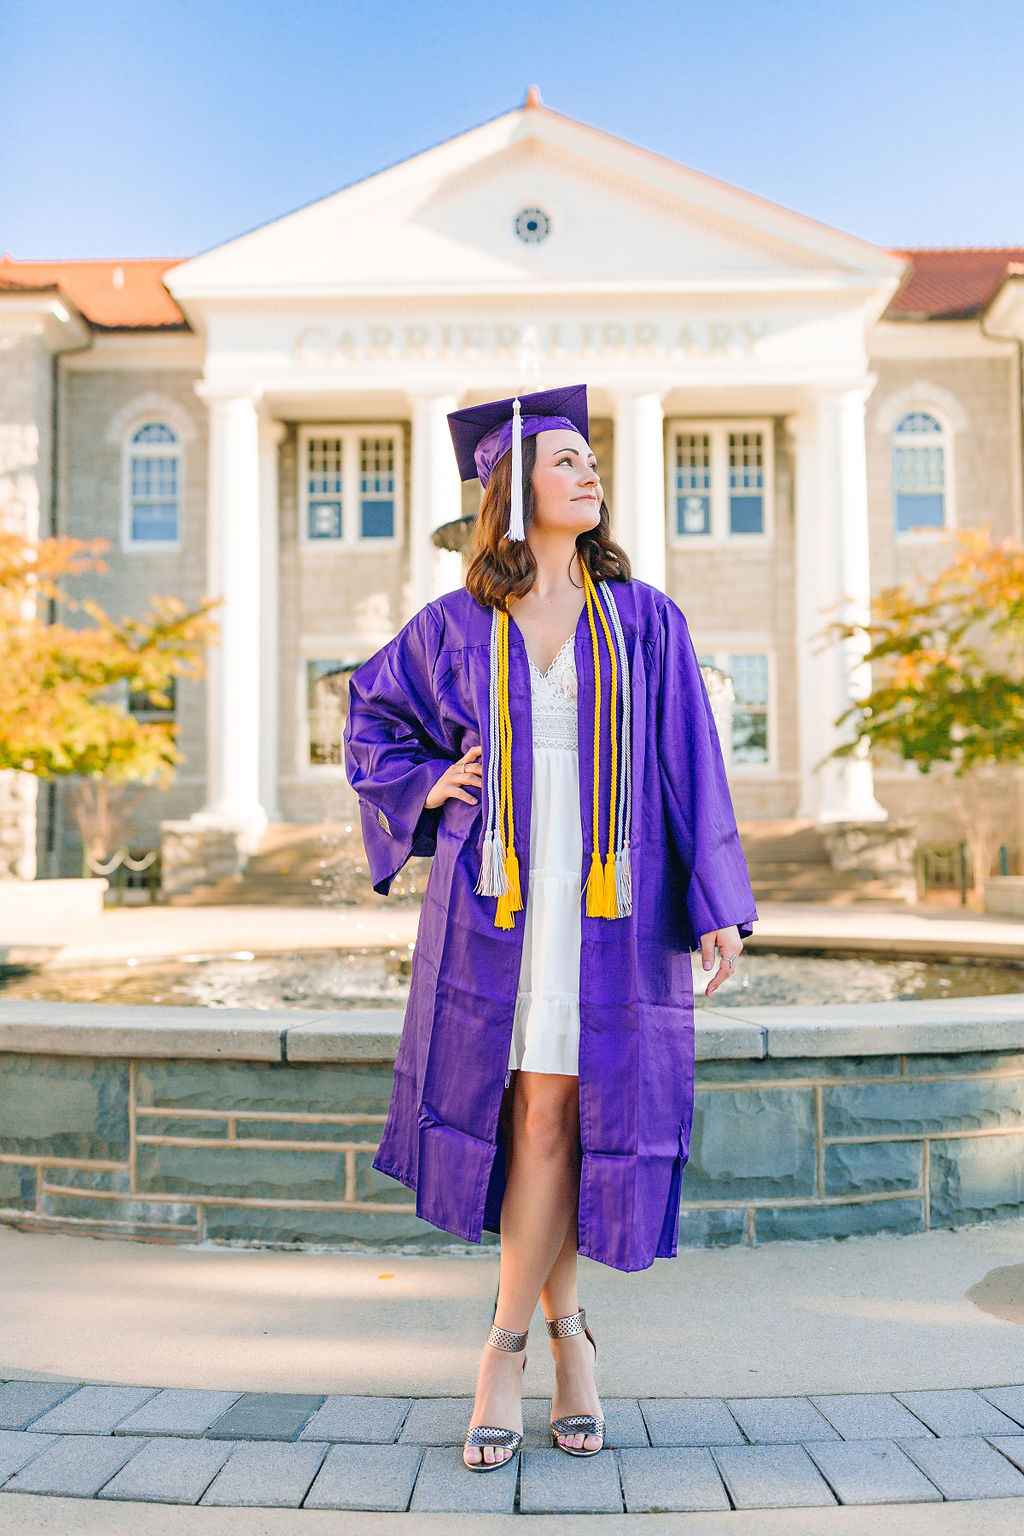 A college grad stands with a hand on her hip in front of a fountain in a purple cap and gown